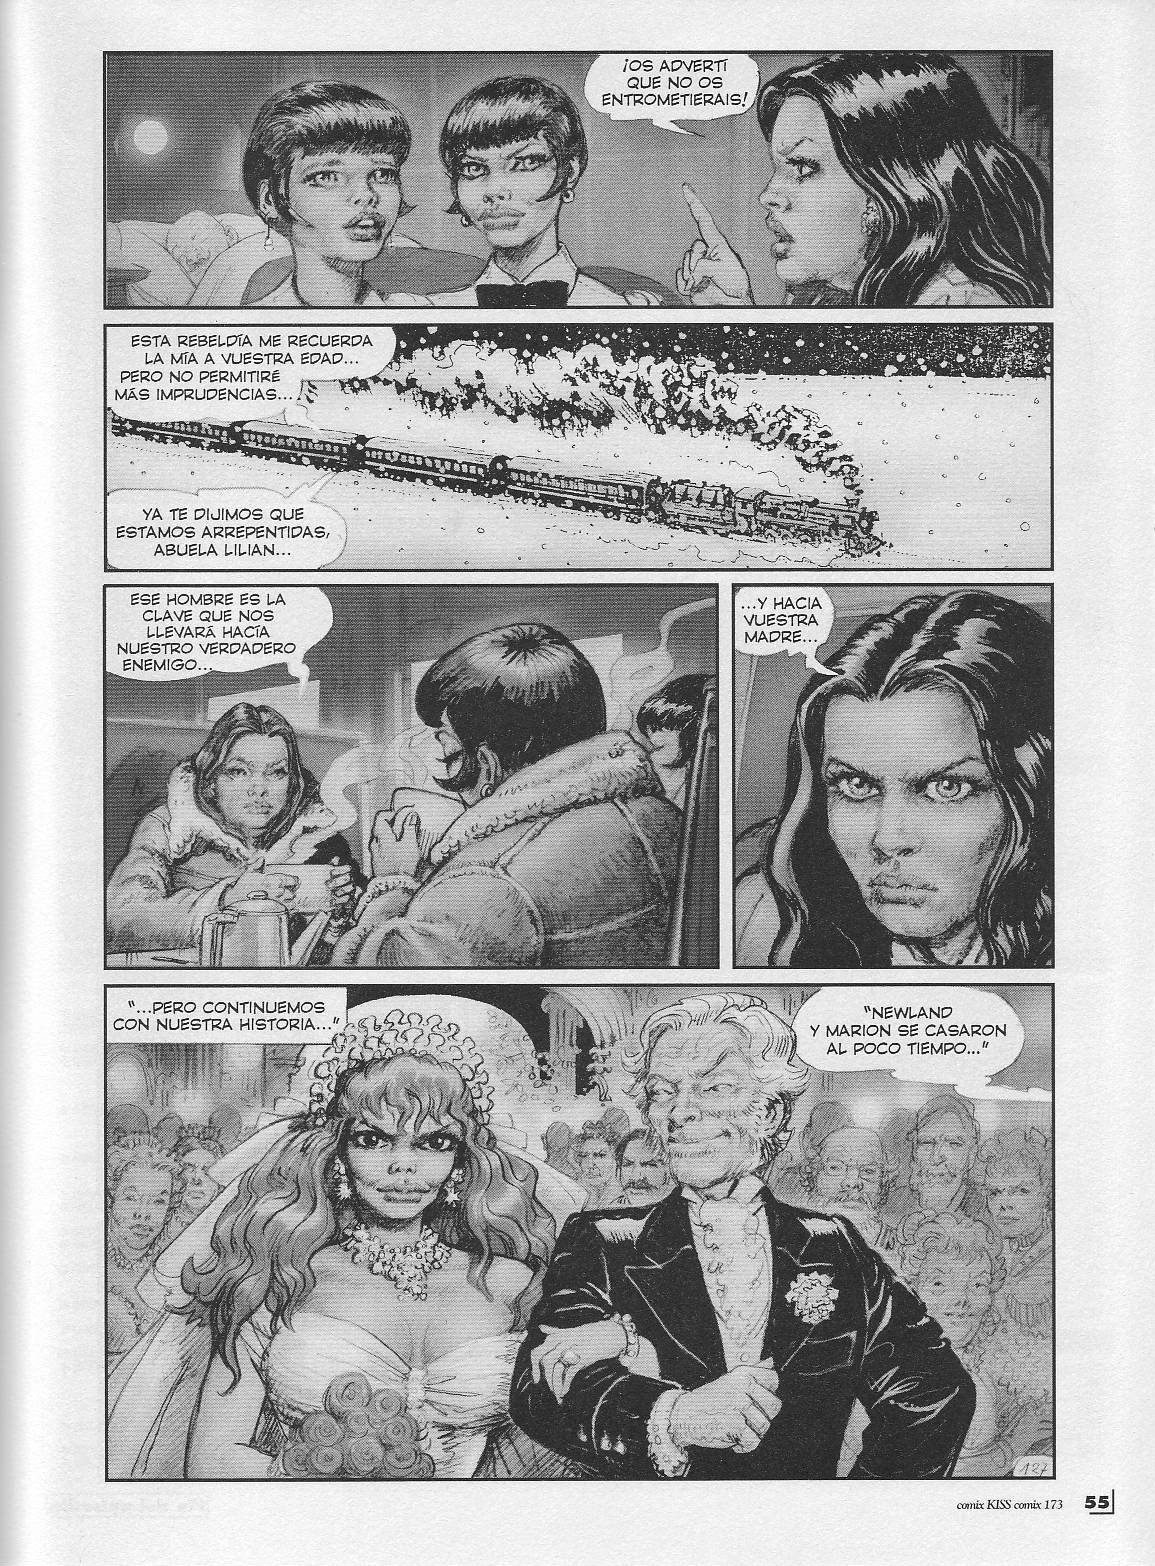 Kiss comix 173 image number 54